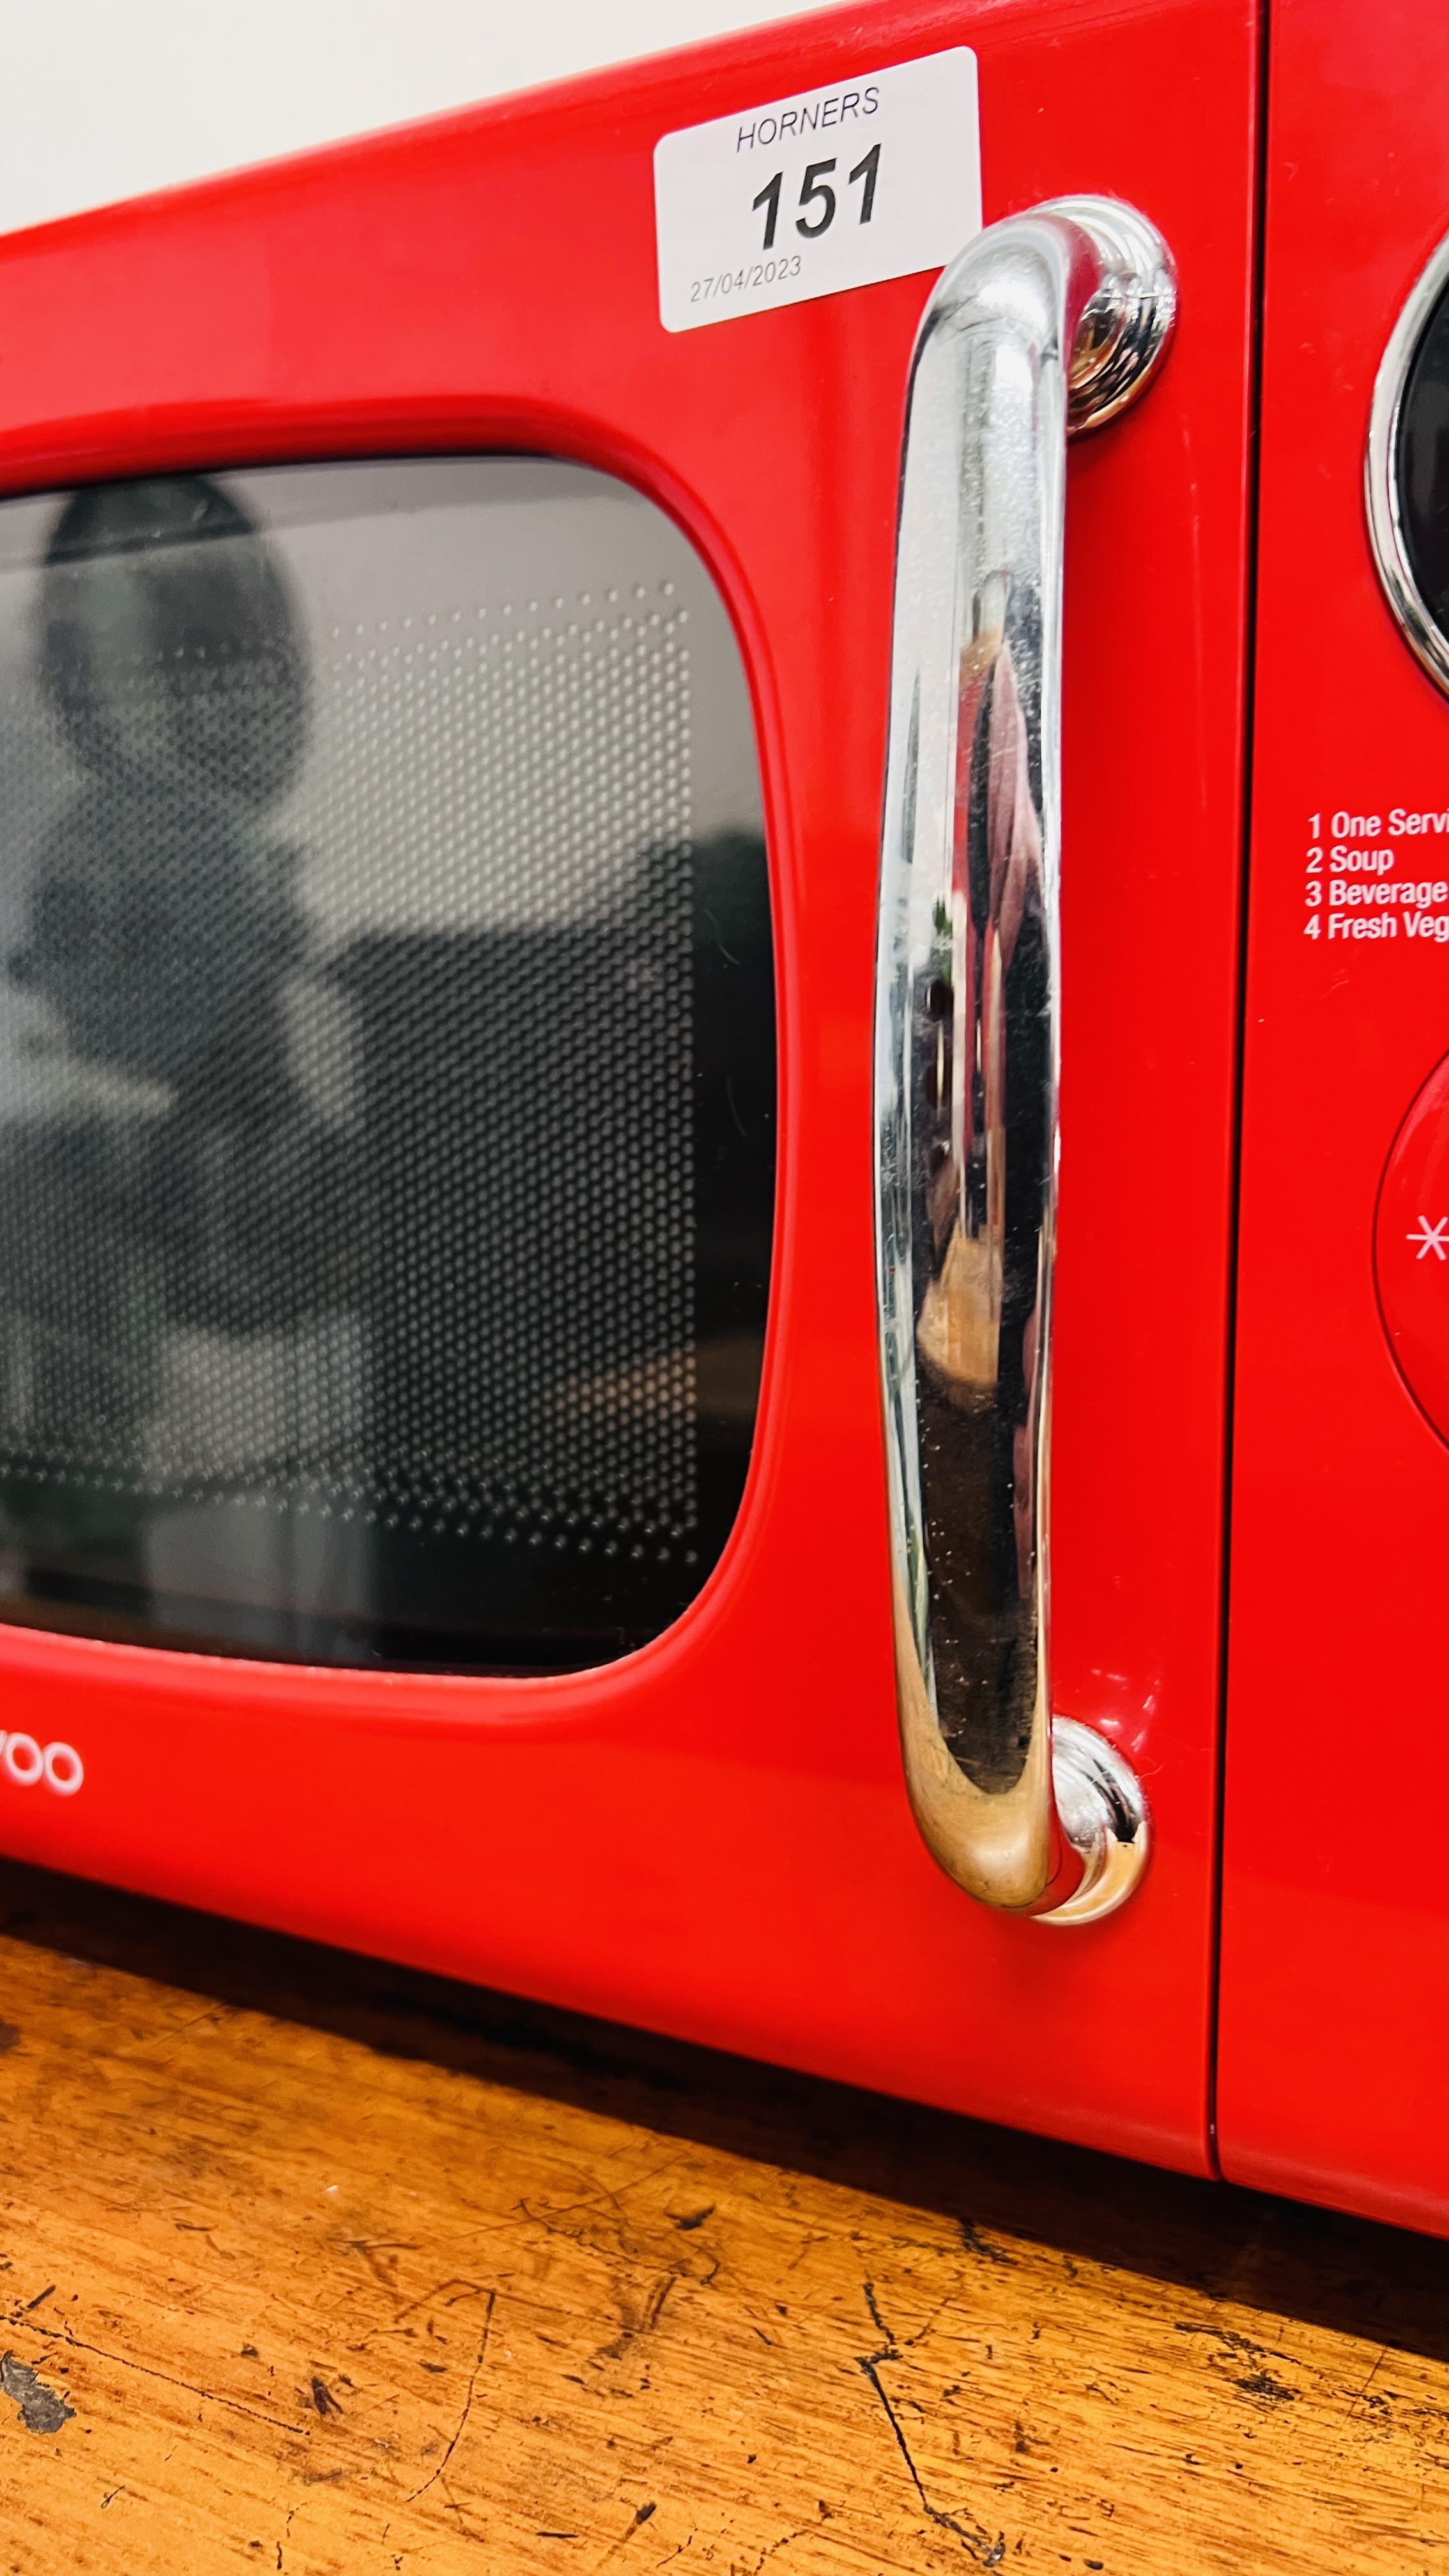 DAEWOO 800 WATT RED FINISH MICROWAVE OVEN - SOLD AS SEEN. - Image 3 of 5